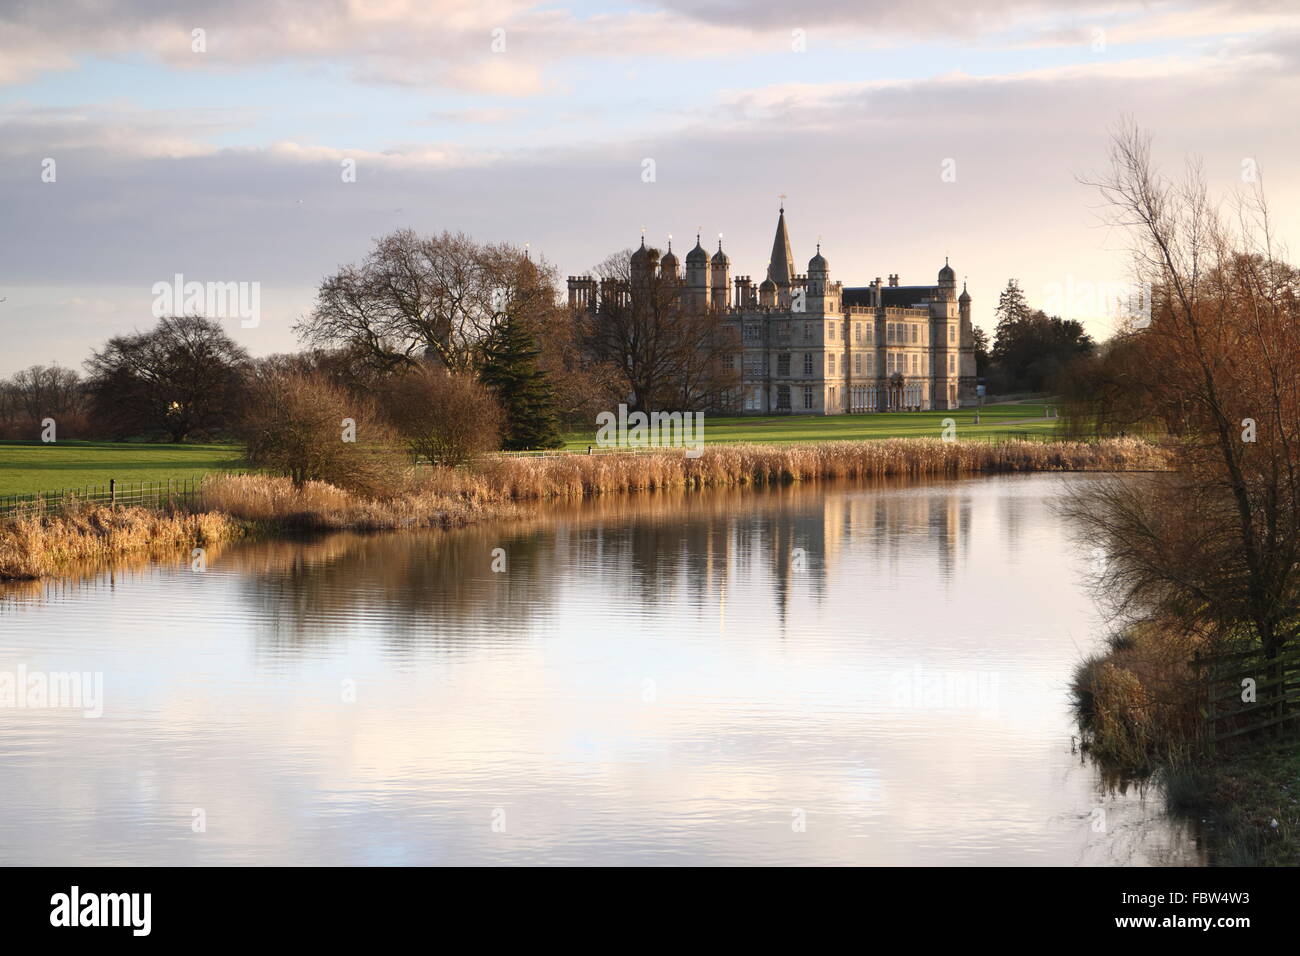 A dawn view of Burghley House across the Capability Brown design lake and landscape. Stock Photo